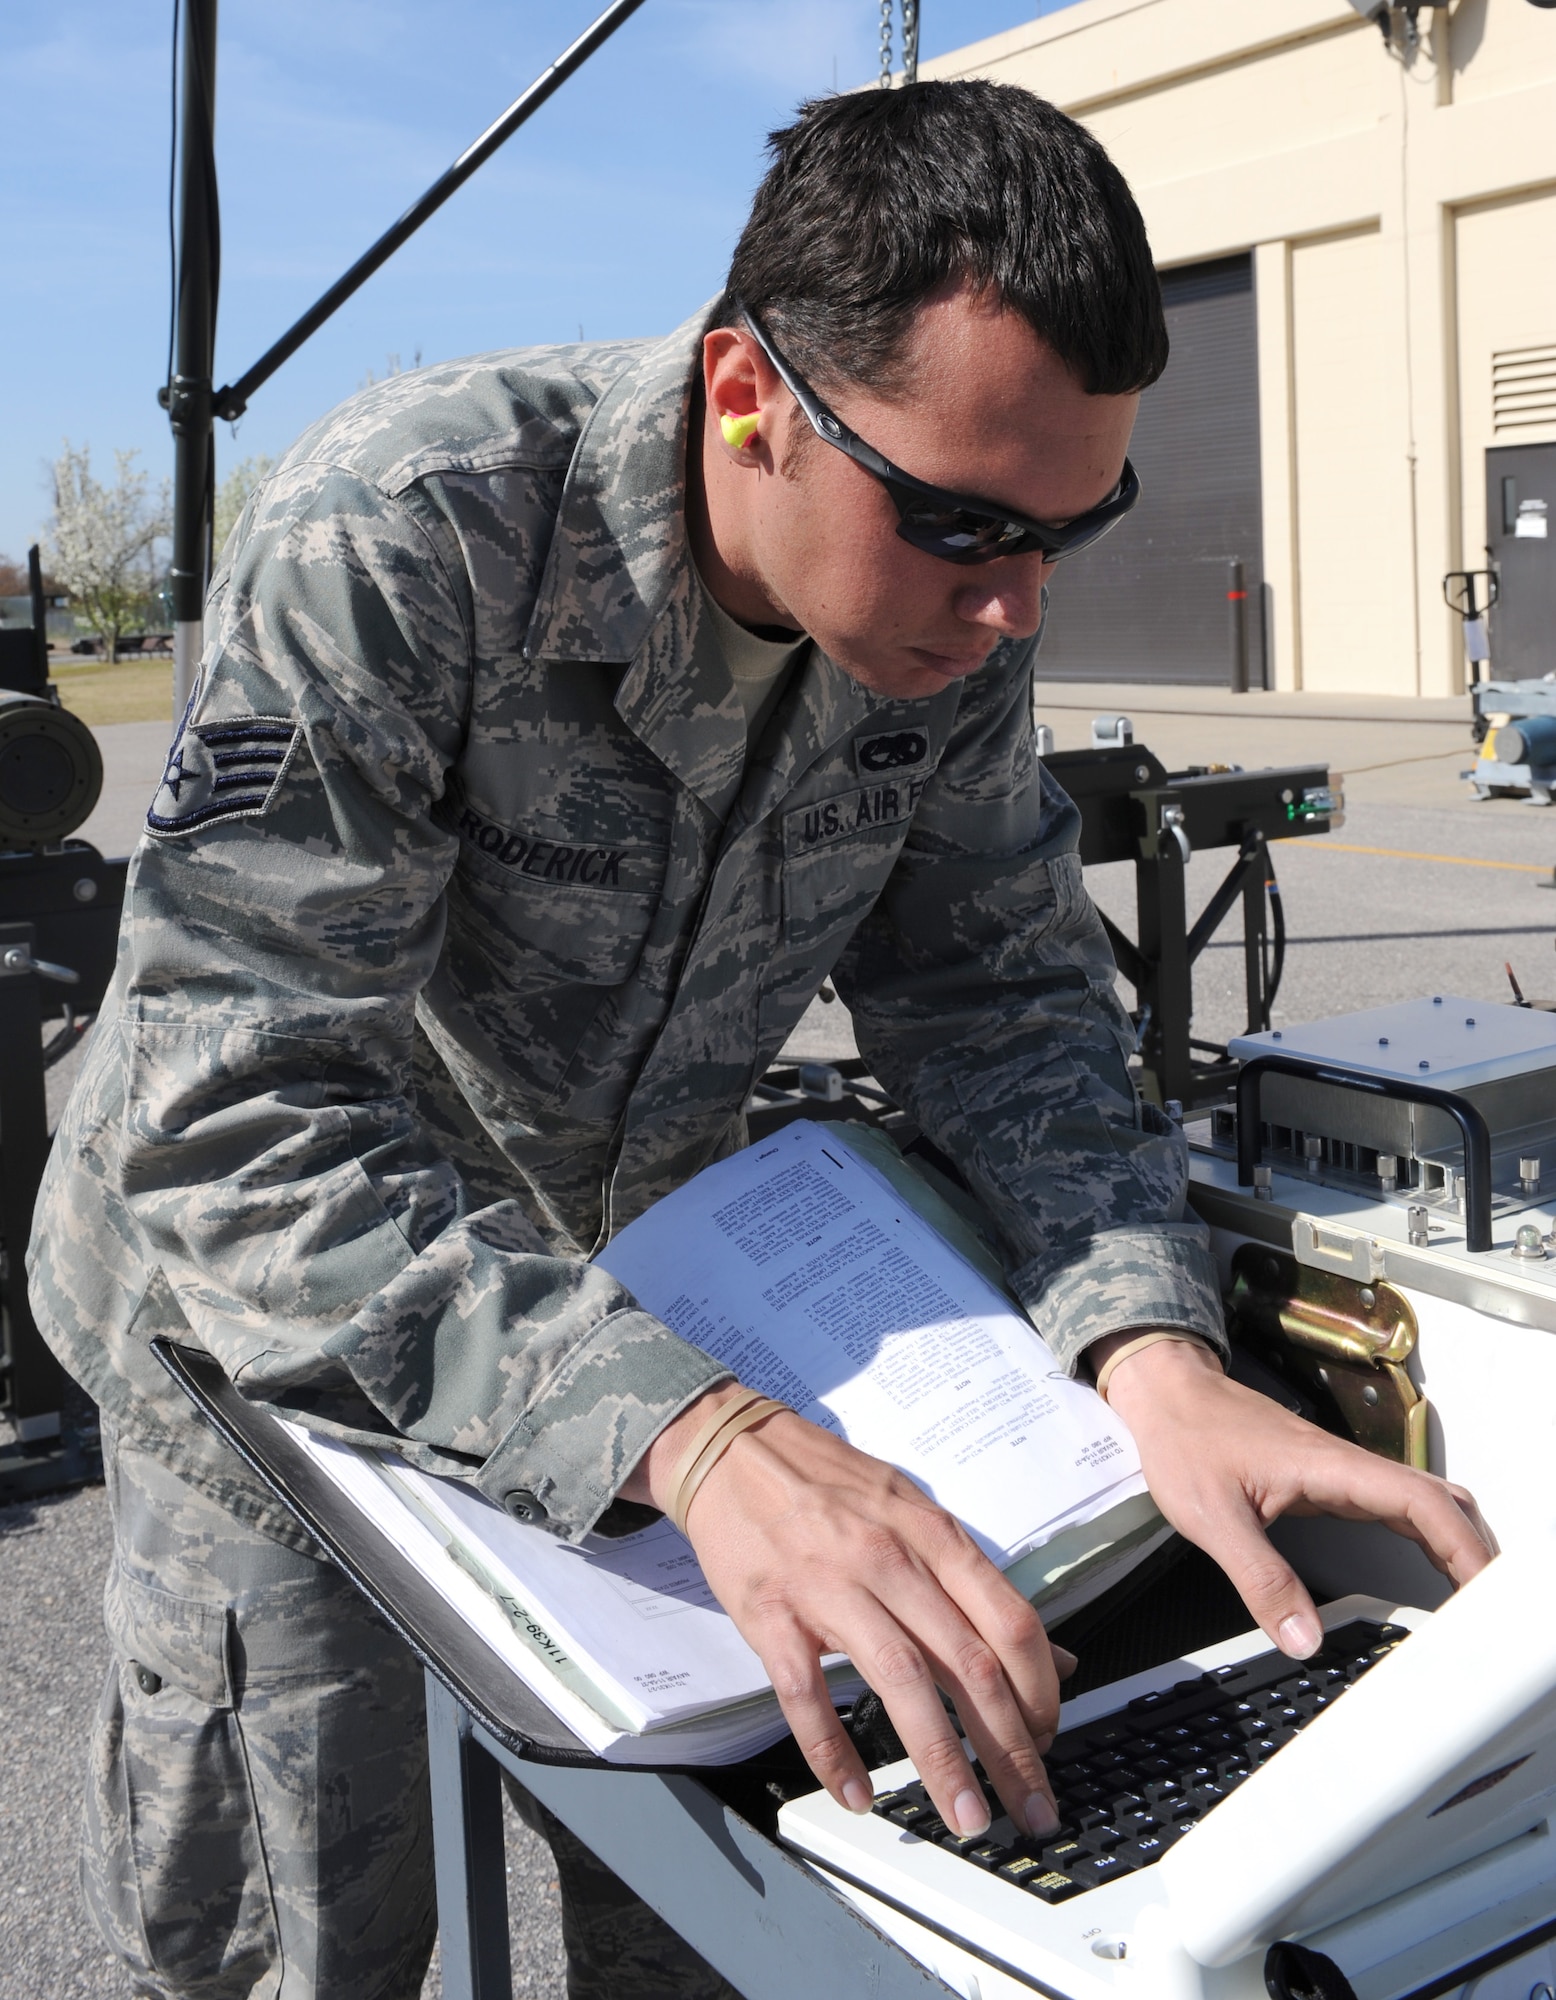 Staff Sgt. Brett Roderick, 4th Equipment Maintenance Squadron conventional maintenance technician, uses his laptop to test fins from a GBU-38 training bomb during a bomb build on Seymour Johnson Air Force Base, N.C., March 24, 2010. Roderick tests the fins for cracks or wear and tear before attaching them to a bomb unit. Roderick hails from Tampa Bay, Fla. (U.S. Air Force photo/Airman 1st Class Gino Reyes)